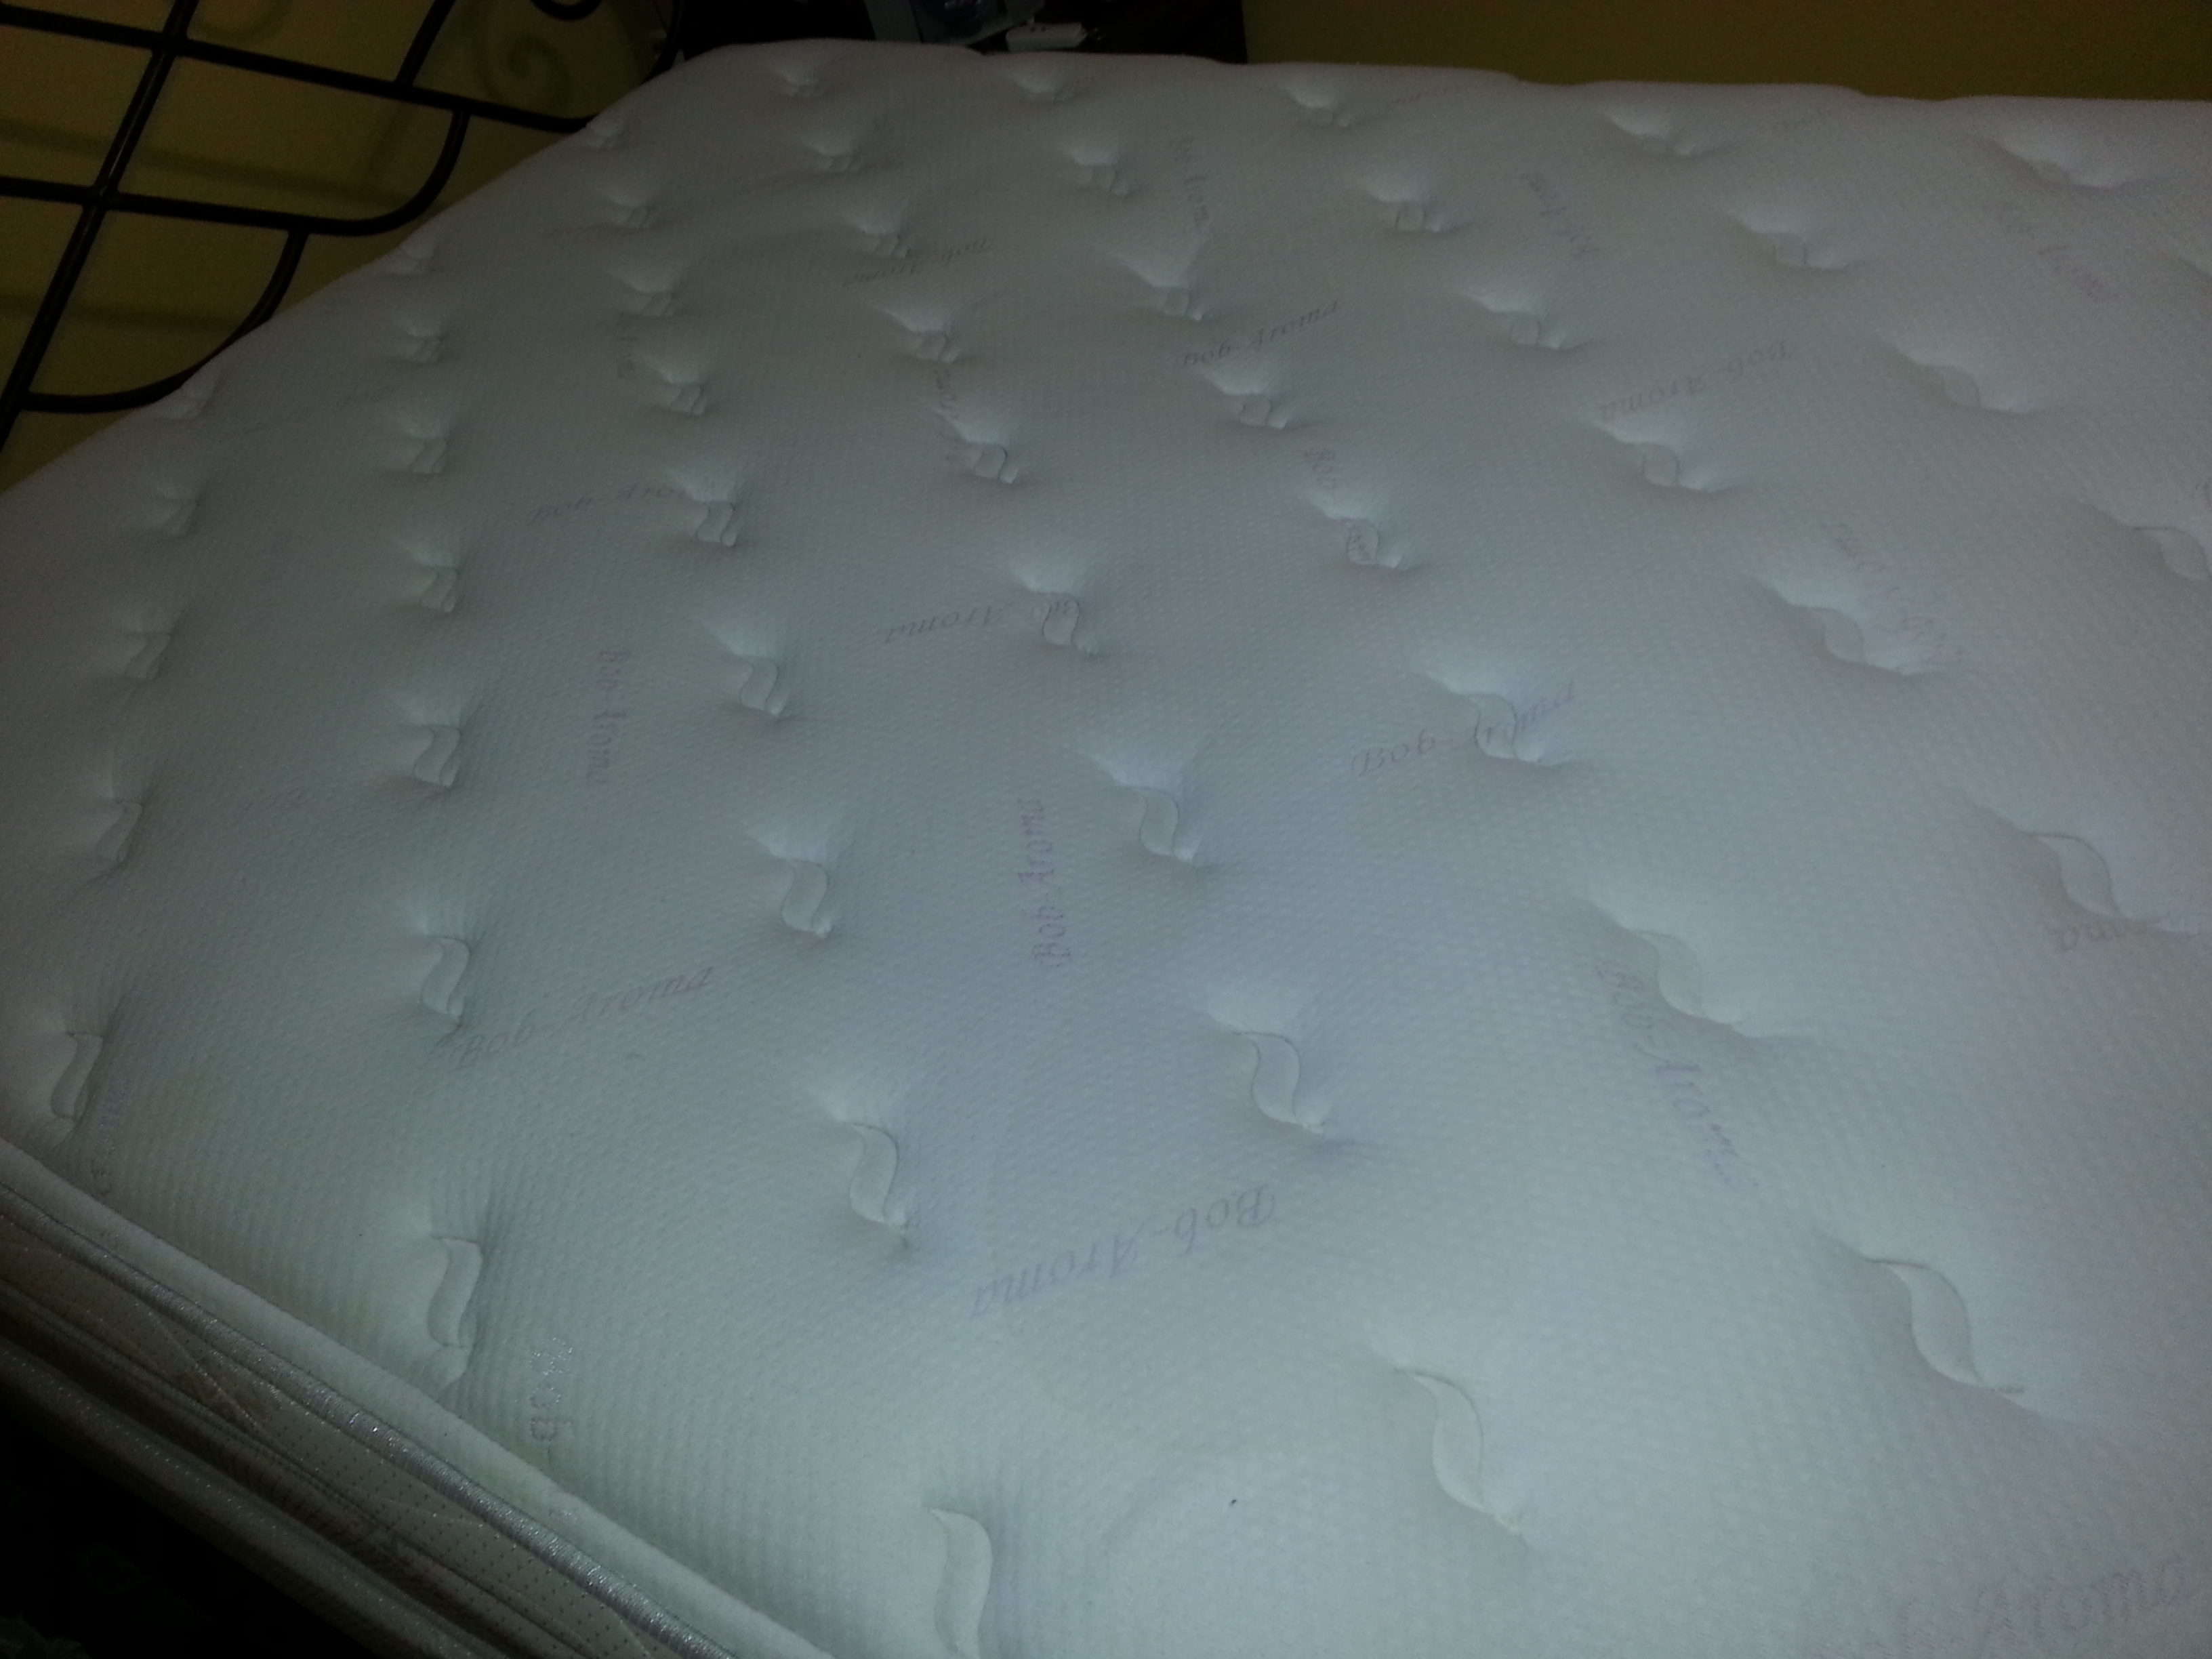 Bobs Mattresses The Day Before My Adjustable Cycled Out Of Refund